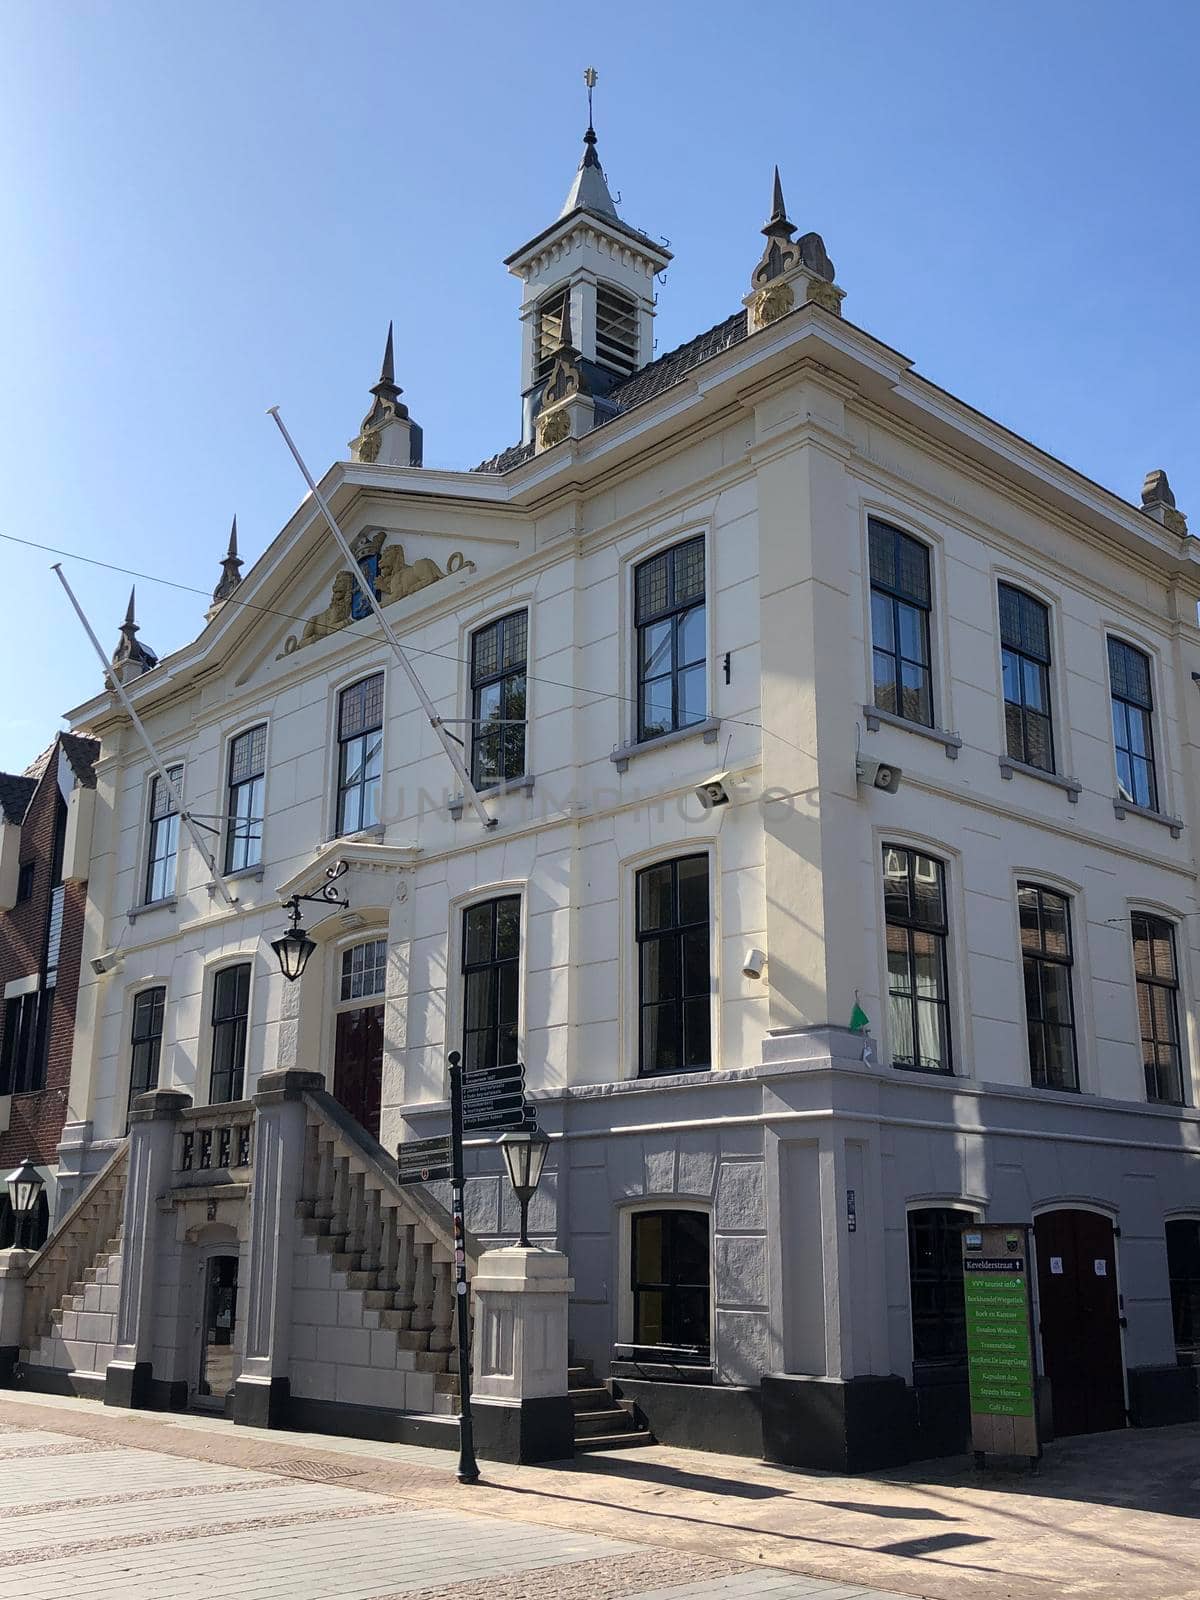 City hall in Groenlo, The Netherlands